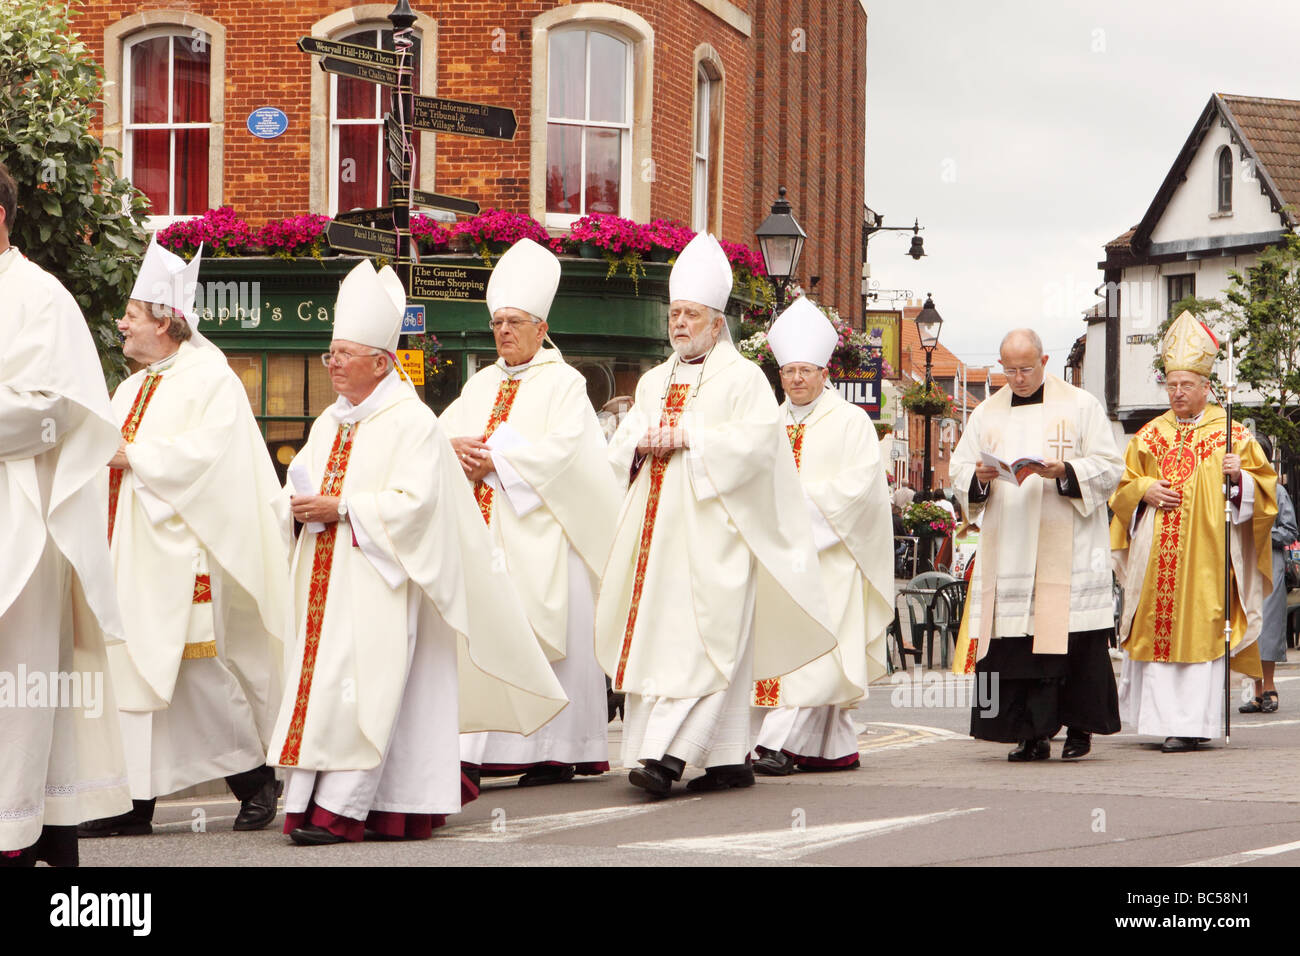 Glastonbury Pilgrimage Somerset UK the annual Christian procession festival of Pilgrims clergy and Bishops along the High Street June 2009 Stock Photo